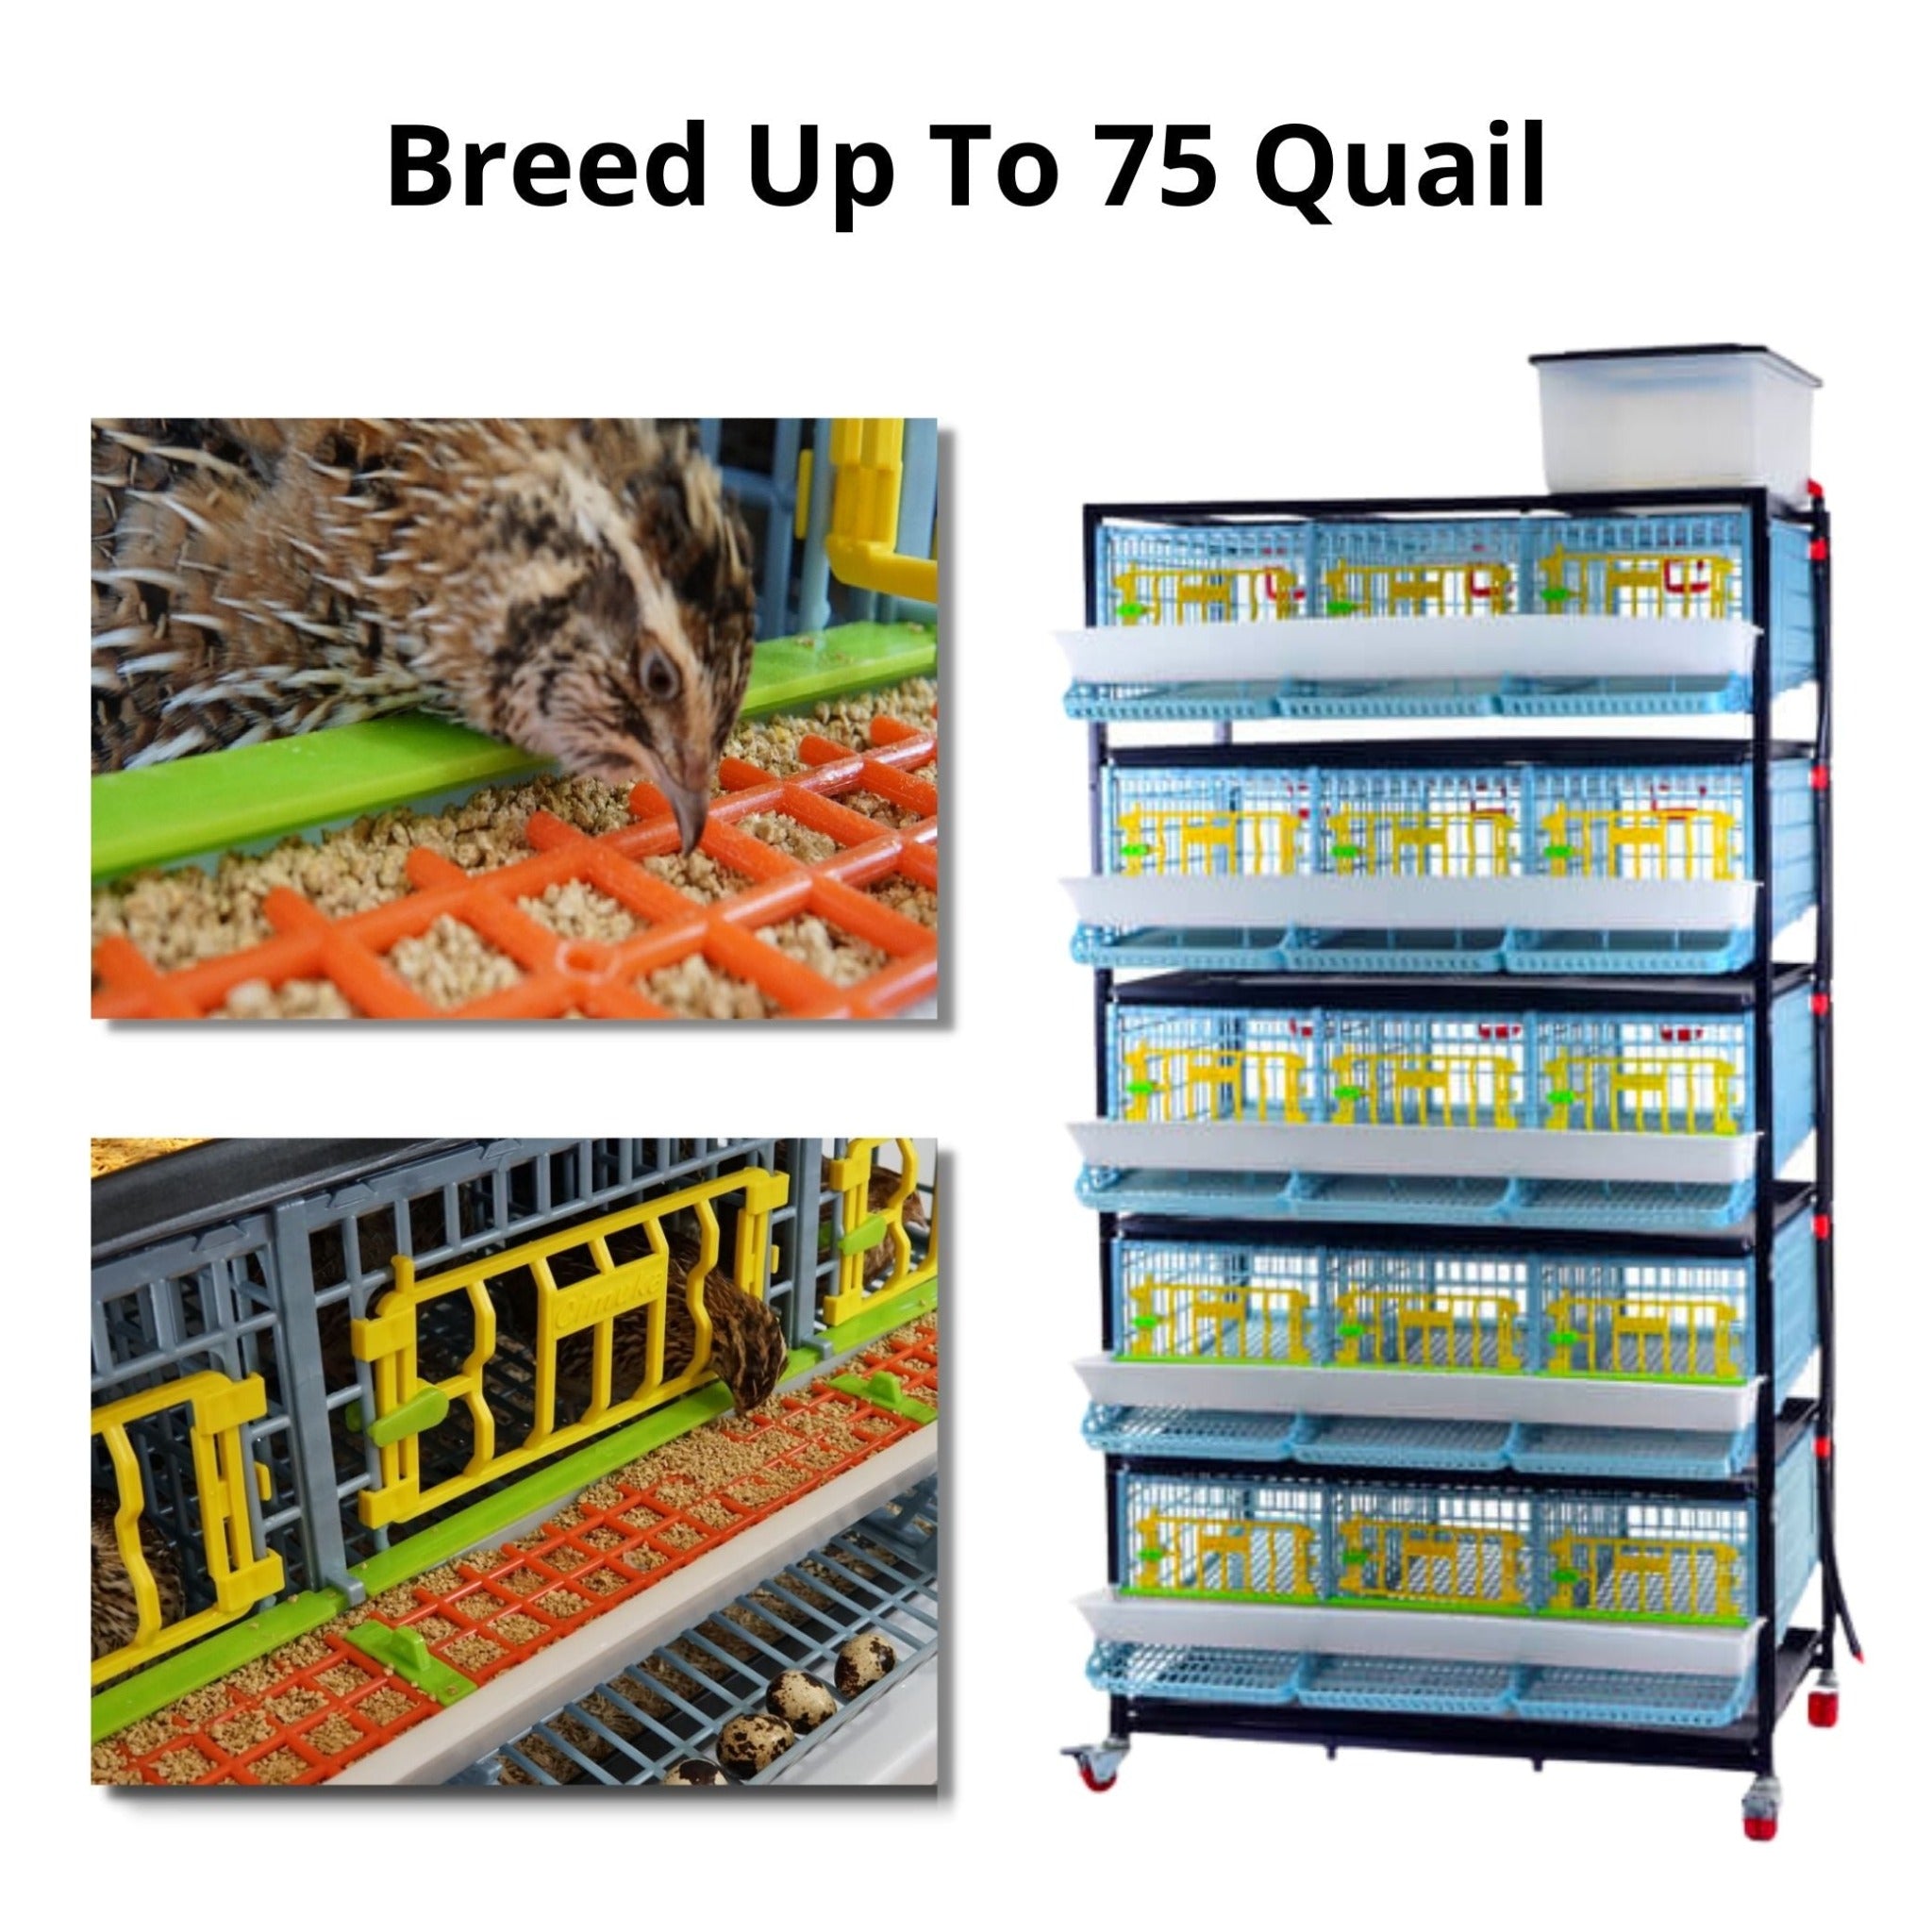 Hatching Time Cimuka 5 Layer Quail cage for breeding shown on the right of image. On the left are Coturnix quails eating from the mounted feeding troughs. Image states up to 75 quail can be bred in layer system.